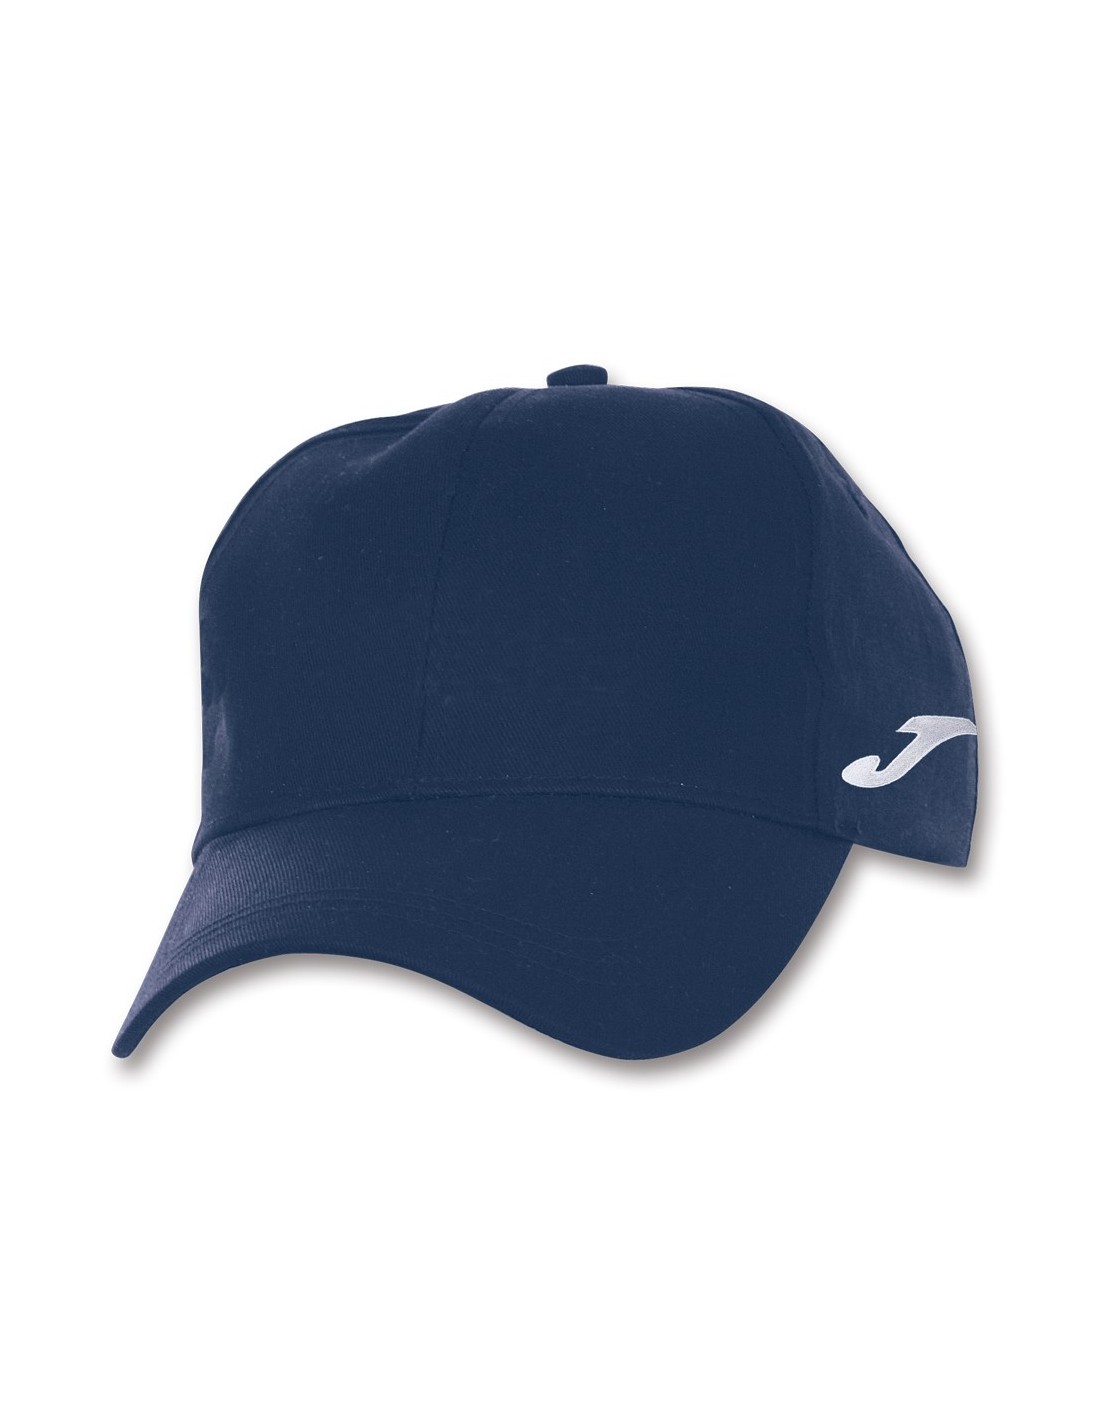 JOMA CLASSIC NAVY CAP - Promotional gift | Onlytenis